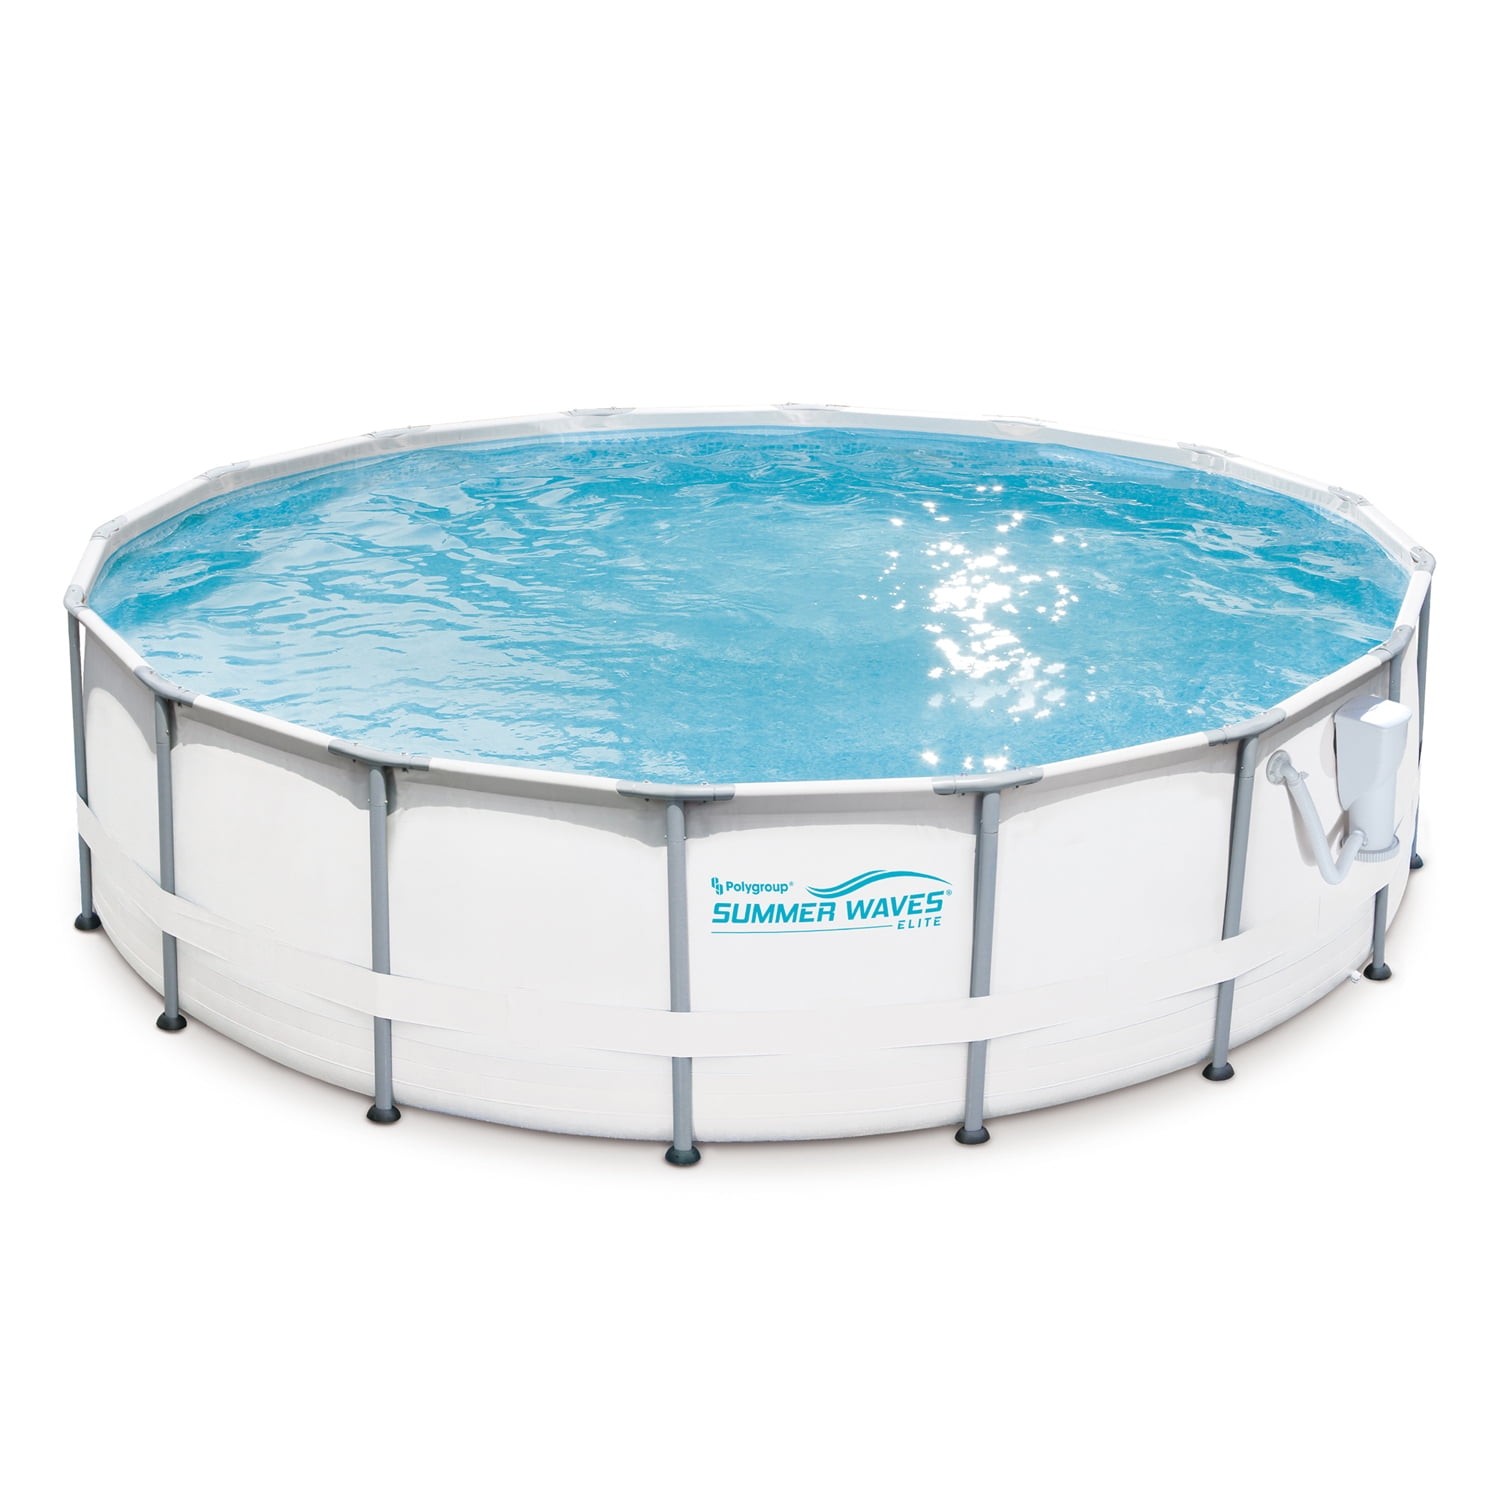 SUMMER WAVES 18 x 48 Round Metal Frame Above Ground Swimming Pool with Deluxe Accessory Set 